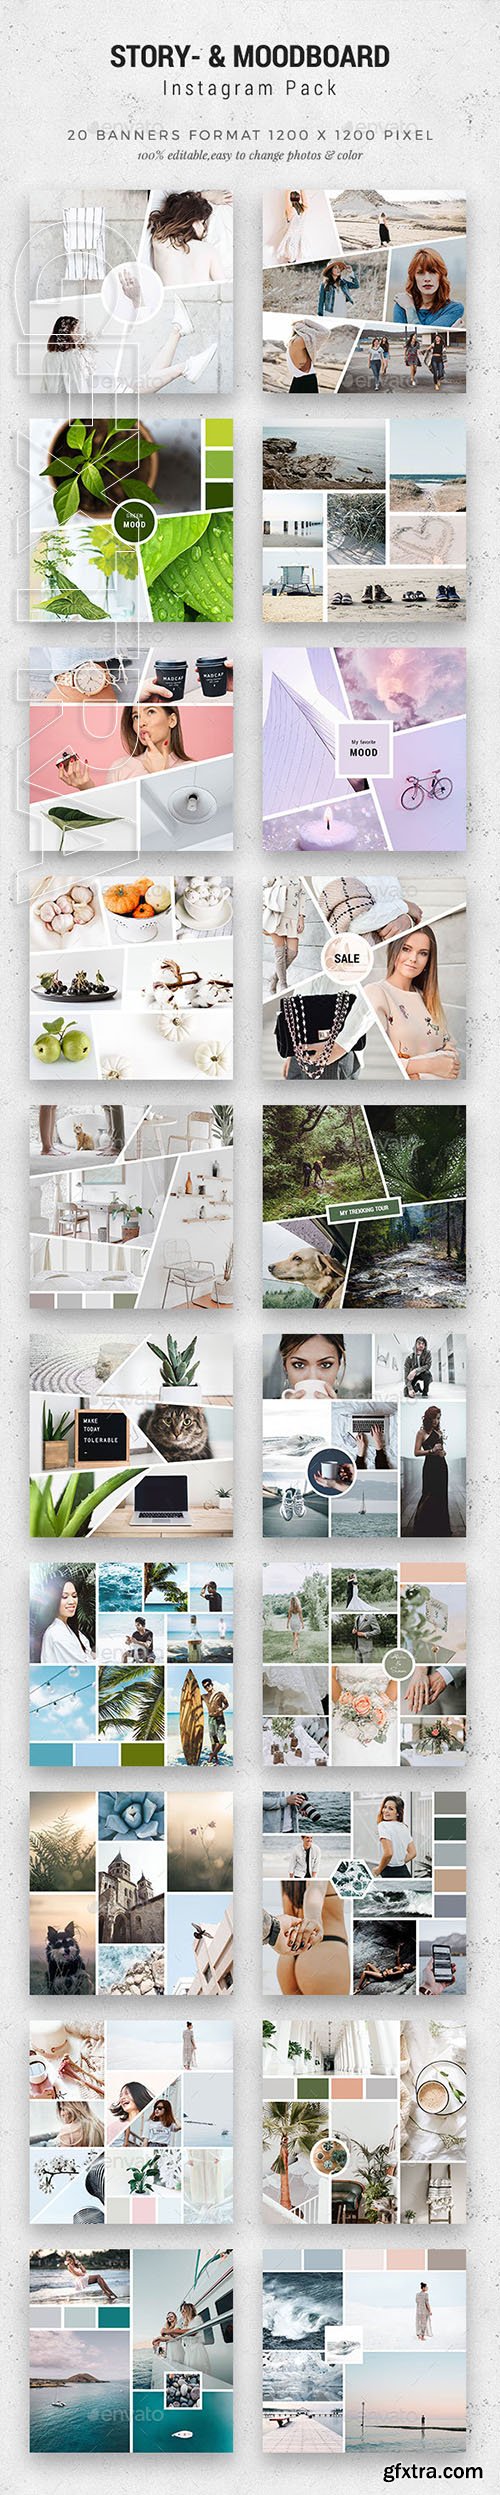 GraphicRiver - Story-Moodboards for Instagram 22729550